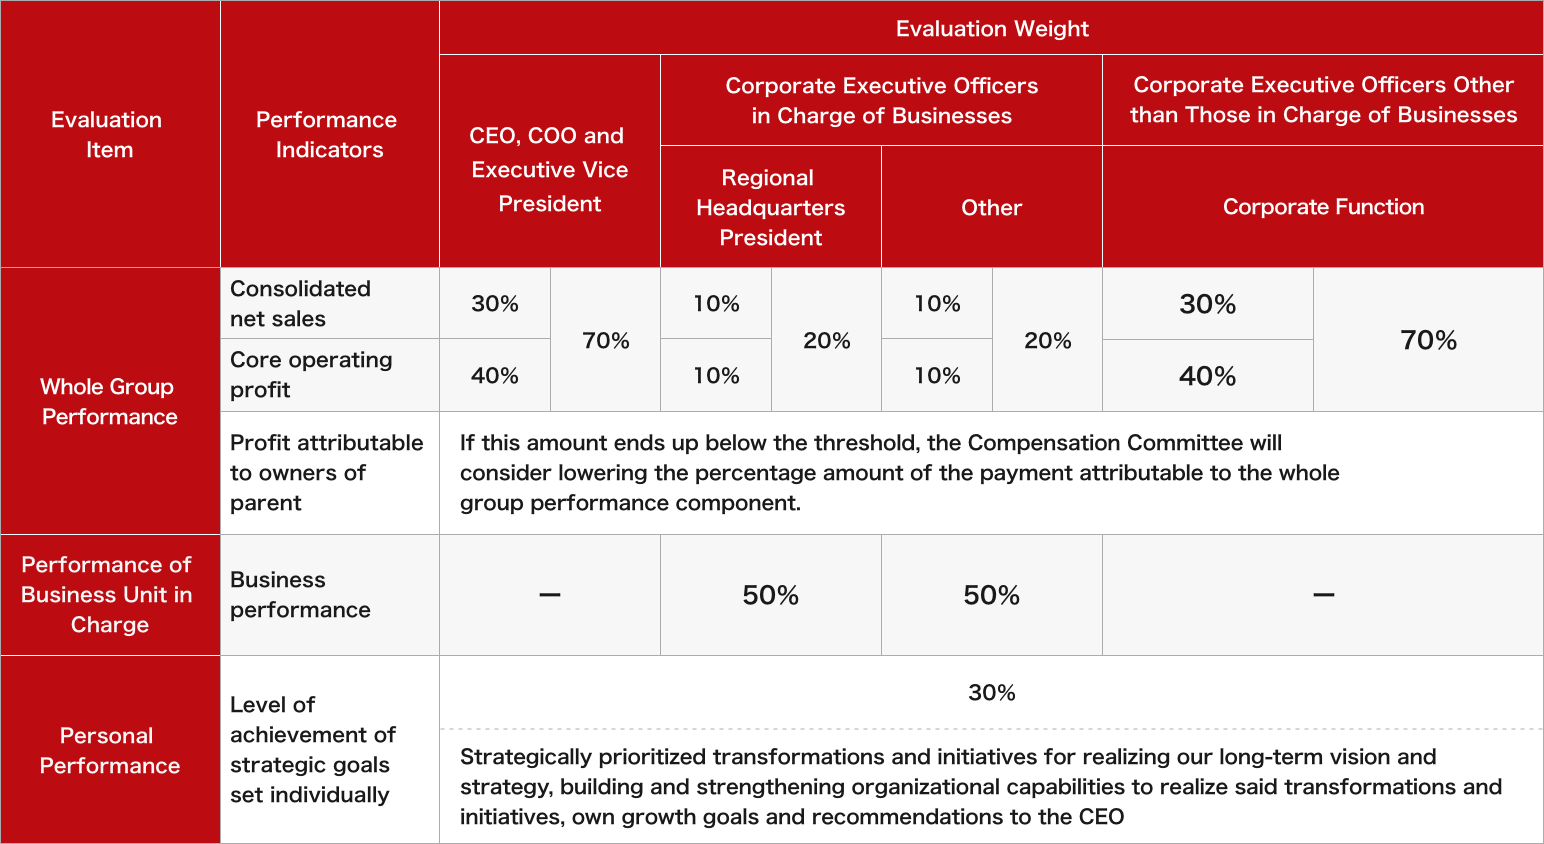 〔Performance indicators and evaluation weights for annual bonus〕